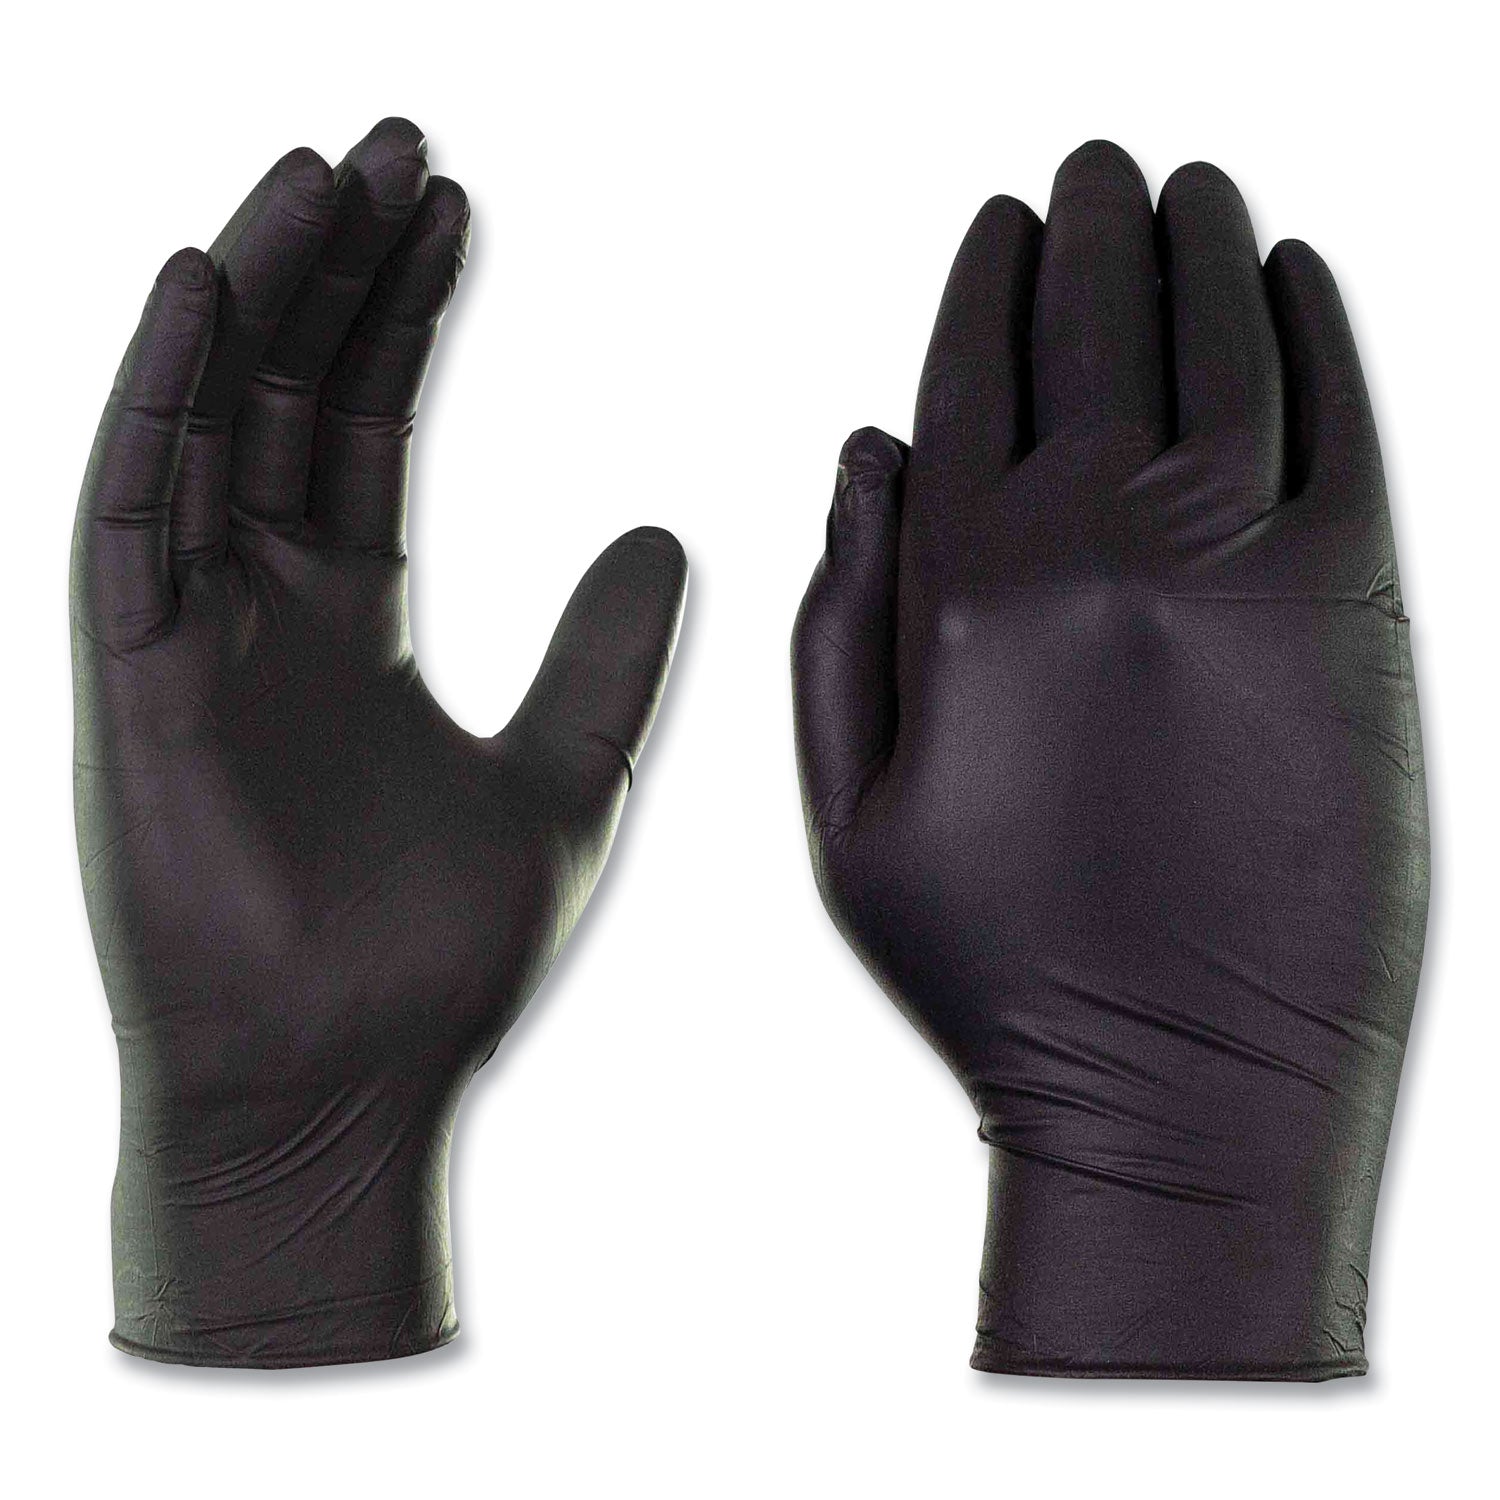 industrial-nitrile-gloves-powder-free-3-mil-small-black-100-box-10-boxes-carton_axcbx342100ct - 2